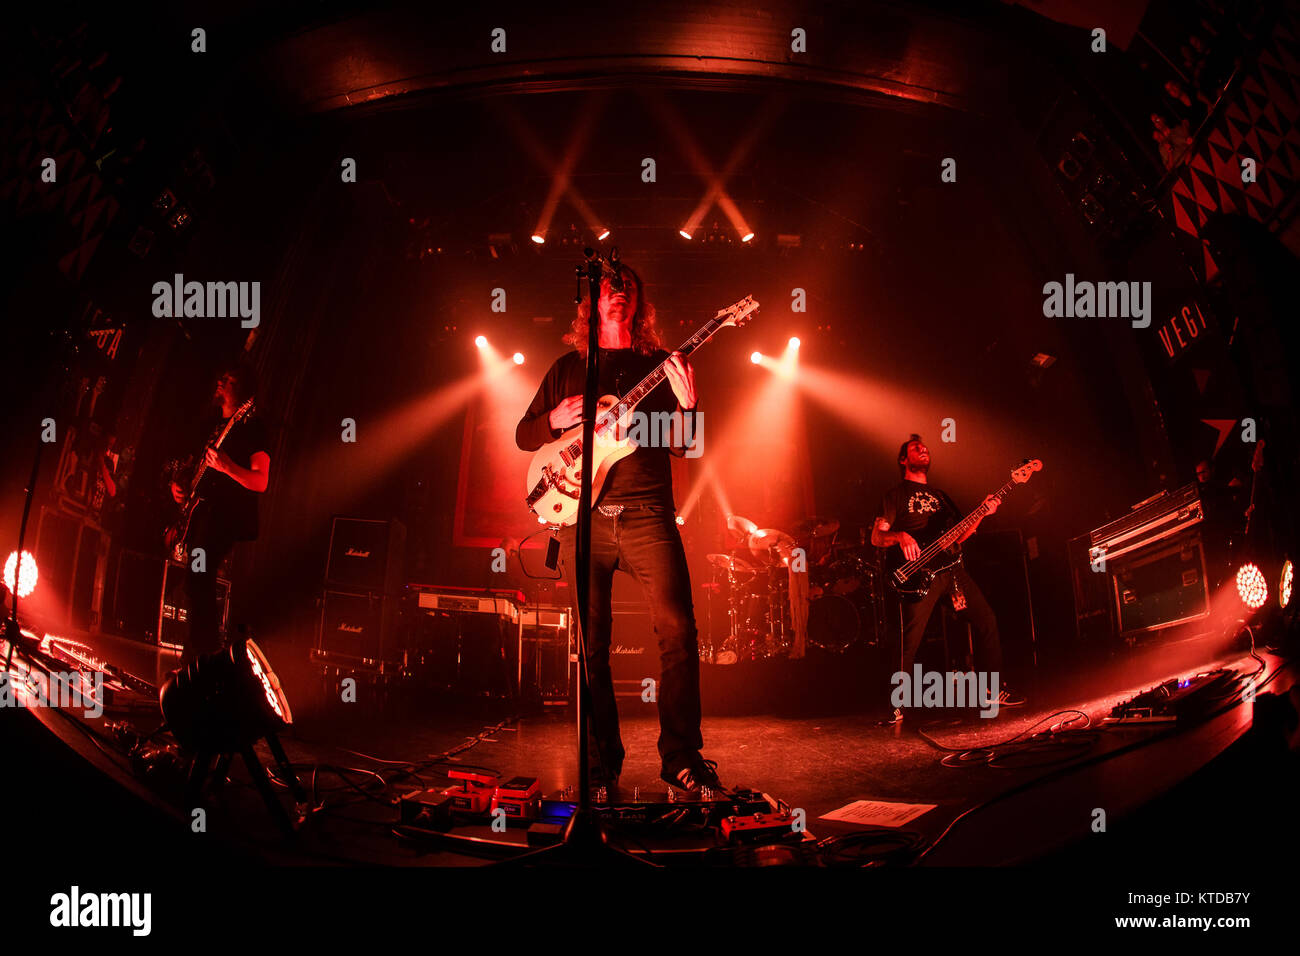 The progressive Swedish death metal band Opeth performs a live concert at VEGA in Copenhagen. Here vocalist and guitarist Mikael Åkerfeldt is seen live on stage. Denmark, 09/11 2014. Stock Photo